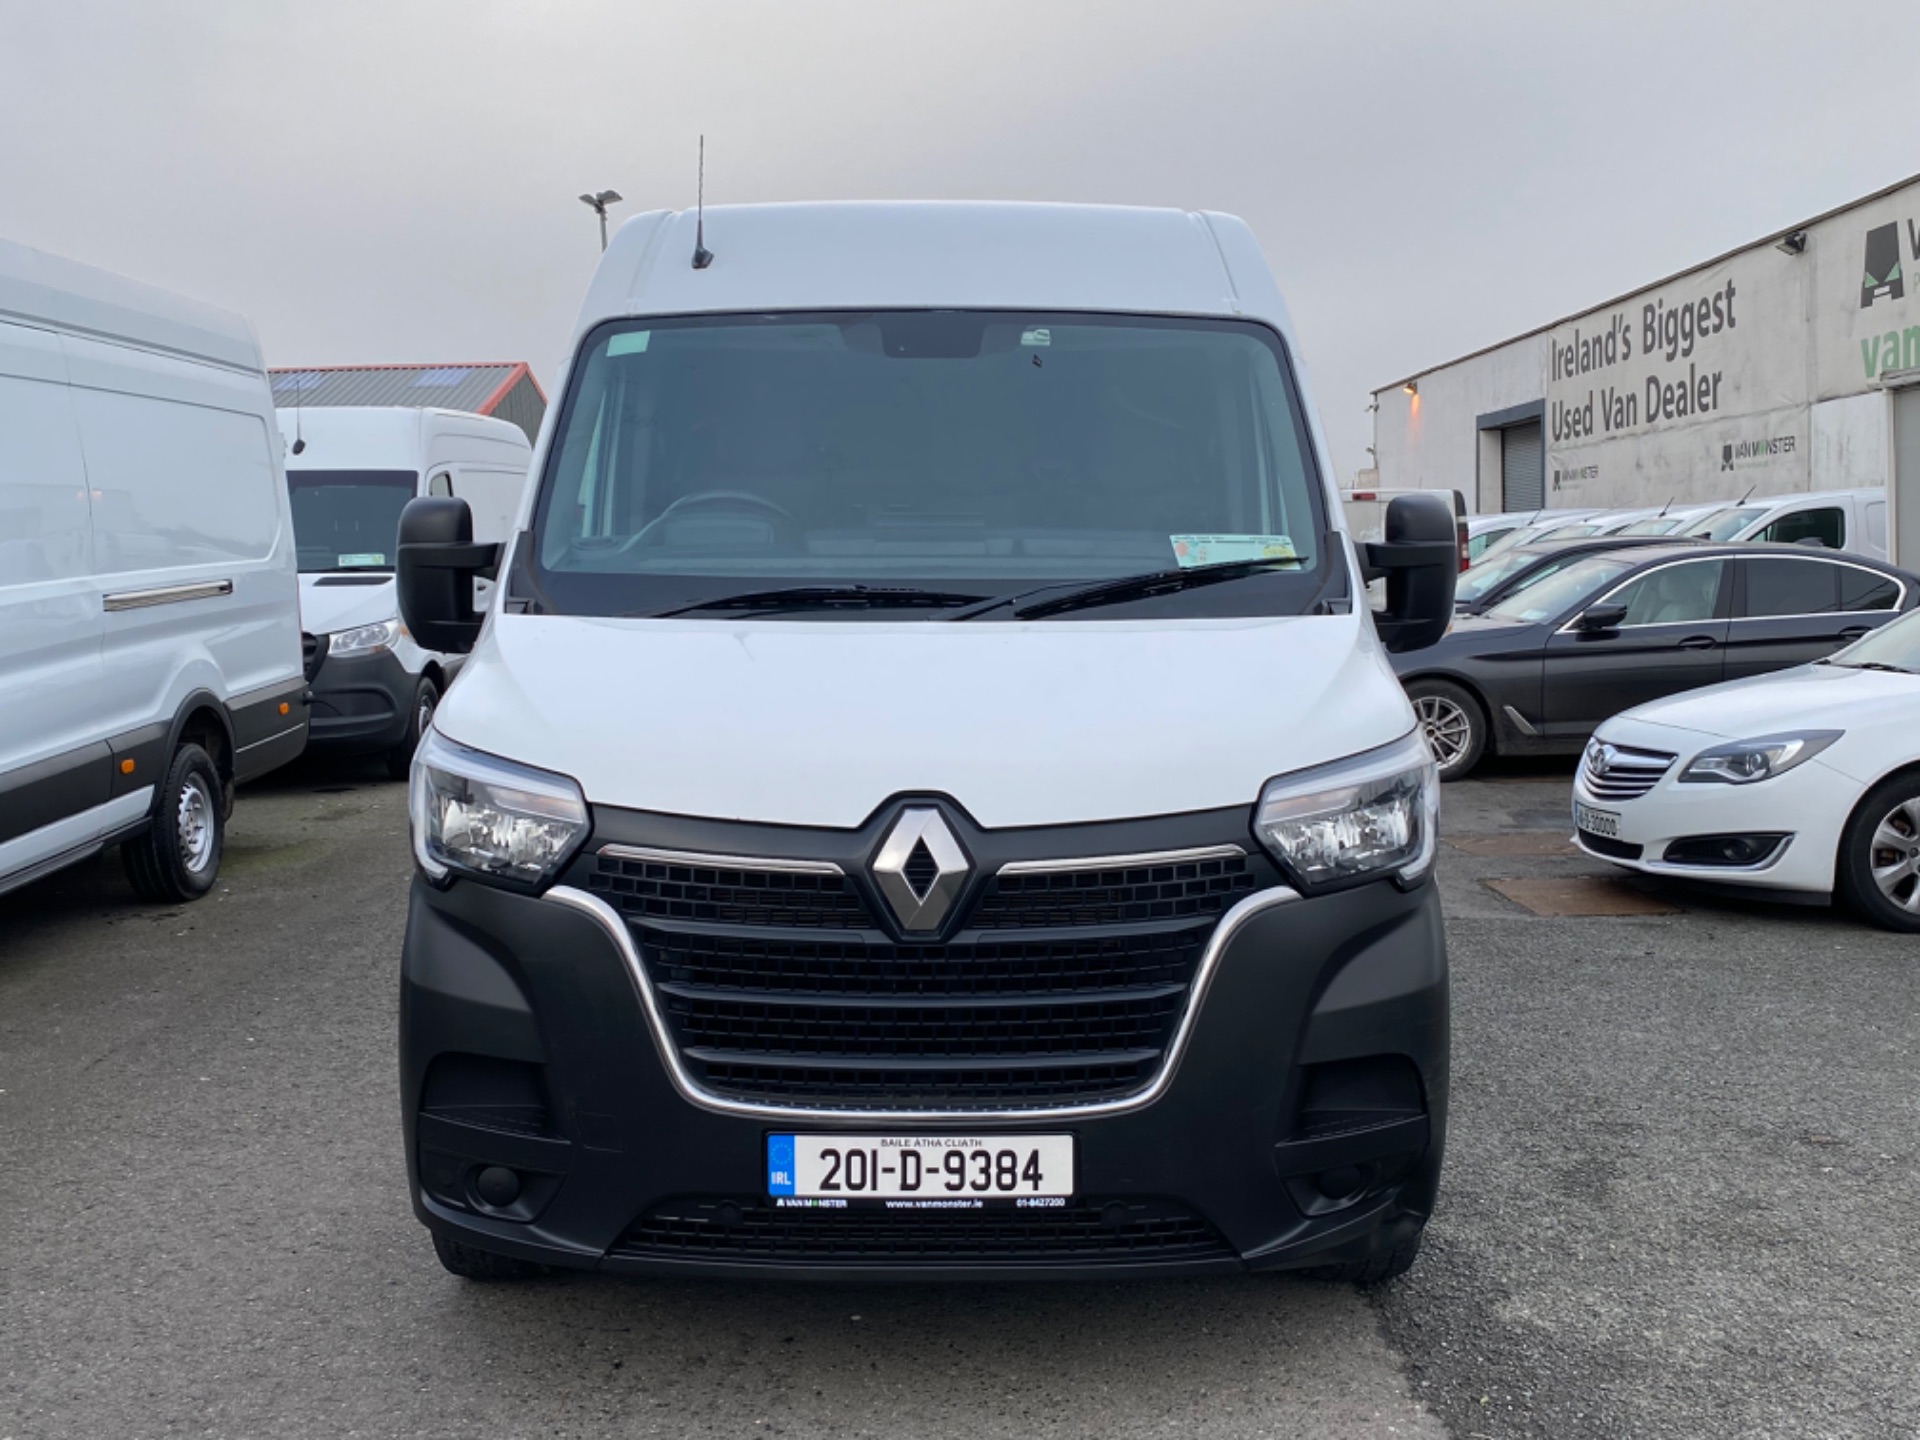 2020 Renault Master RWD LML35 DCI 130 Business MY1 (201D9384) Image 3